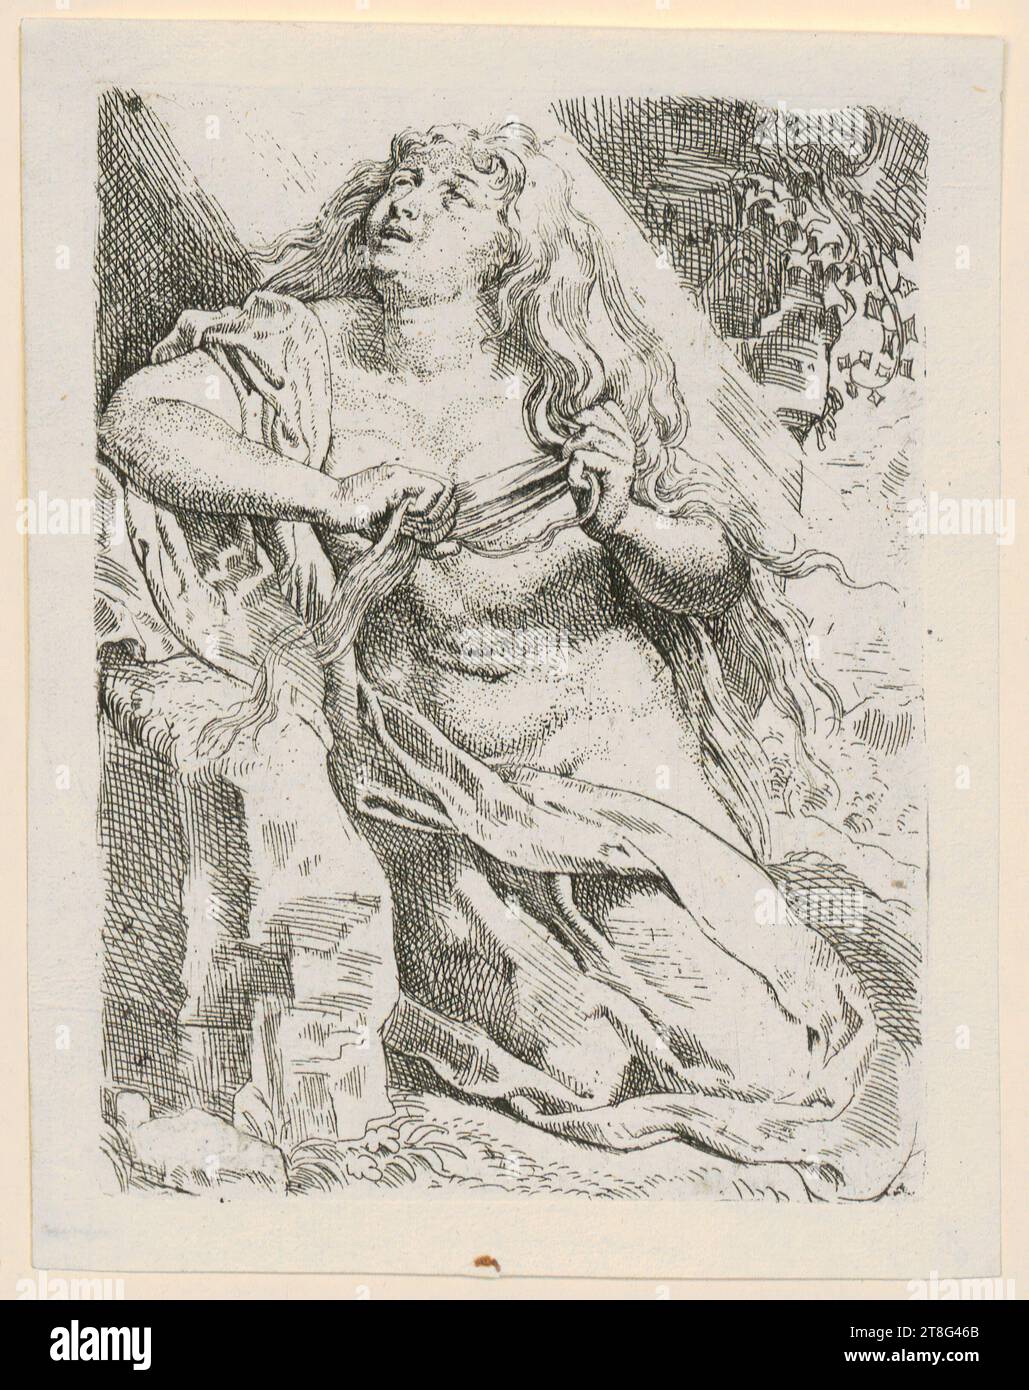 Peter Paul Rubens (1577 - 1640), after, Bussing Mary Magdalene, print medium: 1600 - 1650 first hae, etching, sheet size: 15.4 x 11.9 cm Stock Photo